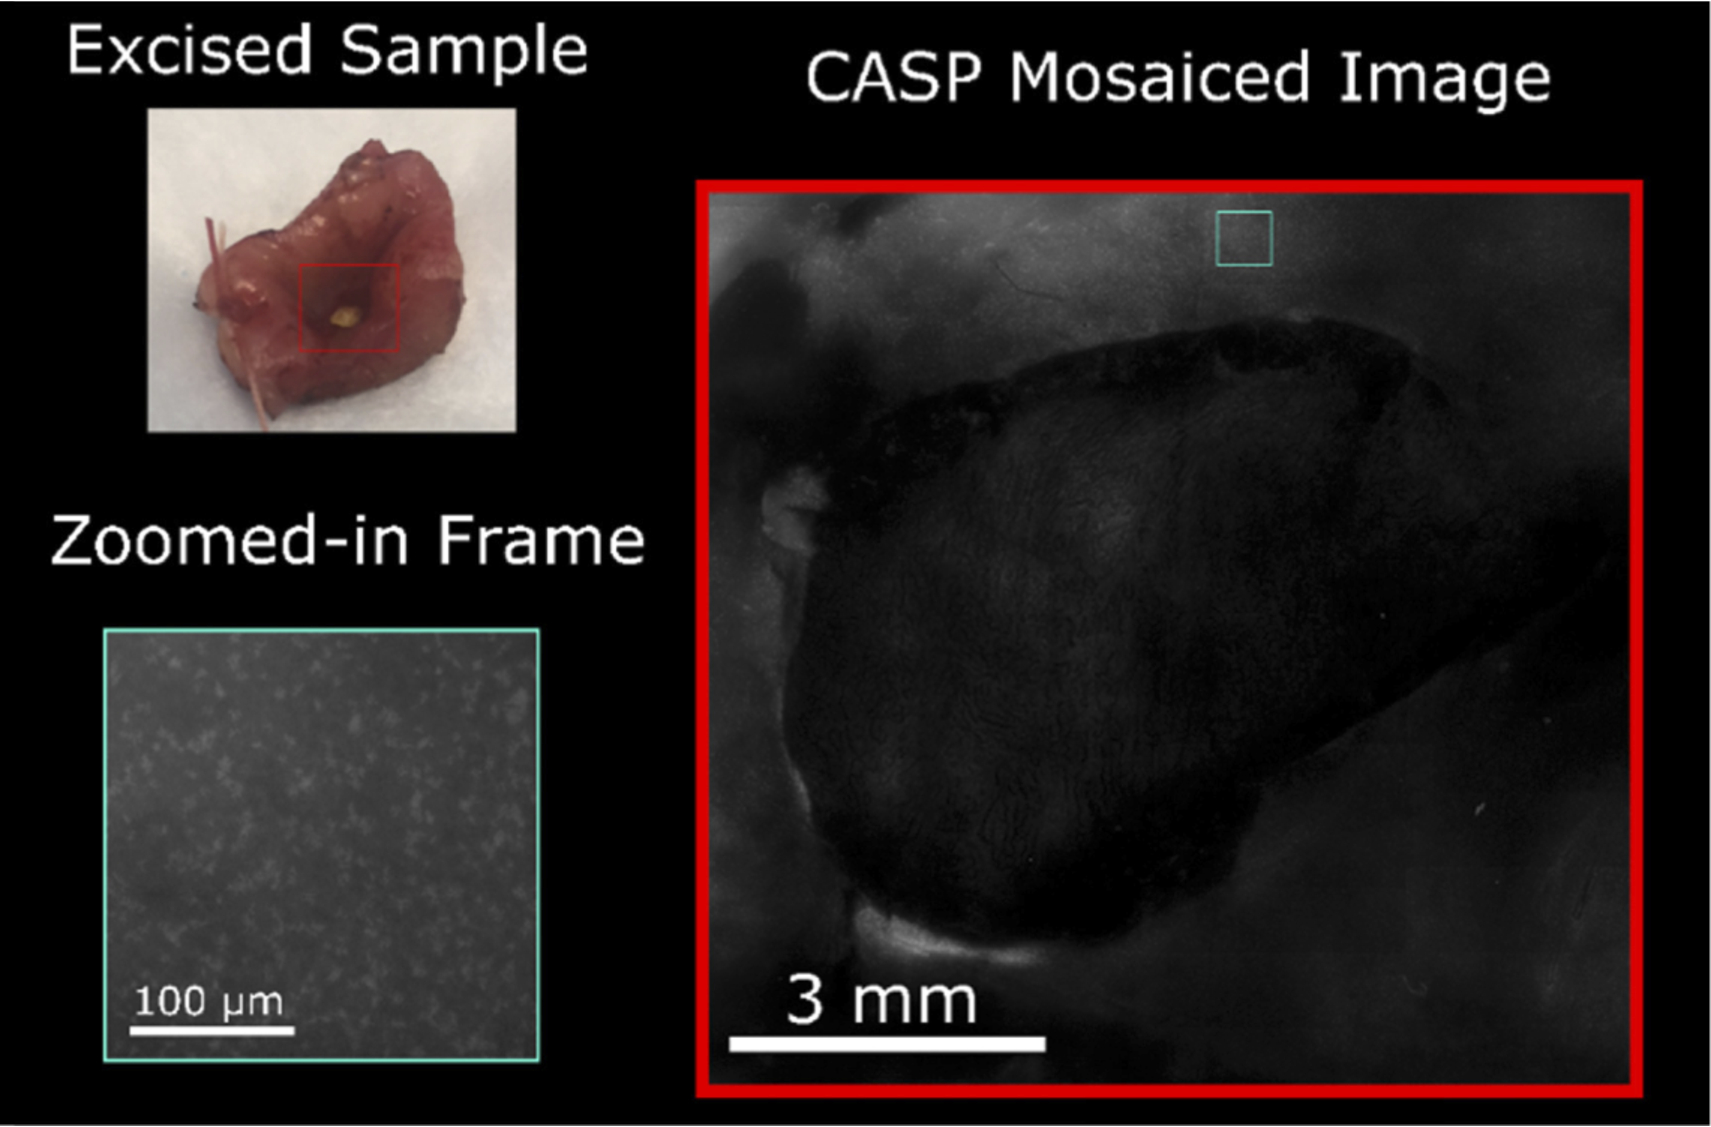 A mosaiced image of an ex-vivo sample with low grade dysplasia. Courtesy of Optics Express